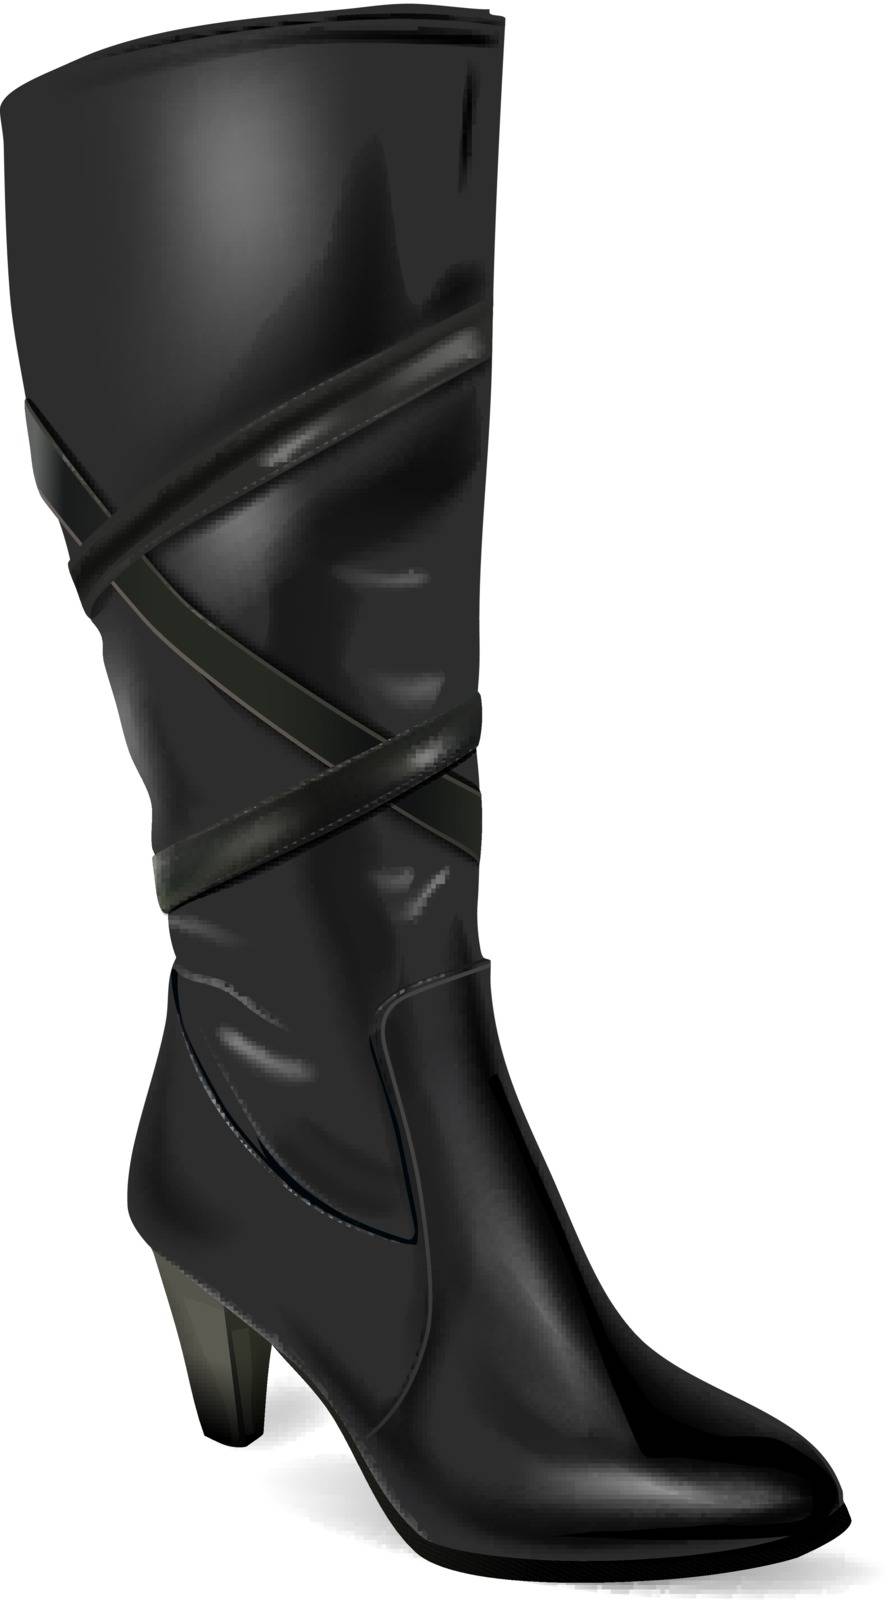 Vector Black Leather Boot on White Background, Eps10 Vector, Gradient Mesh and Transparency Used